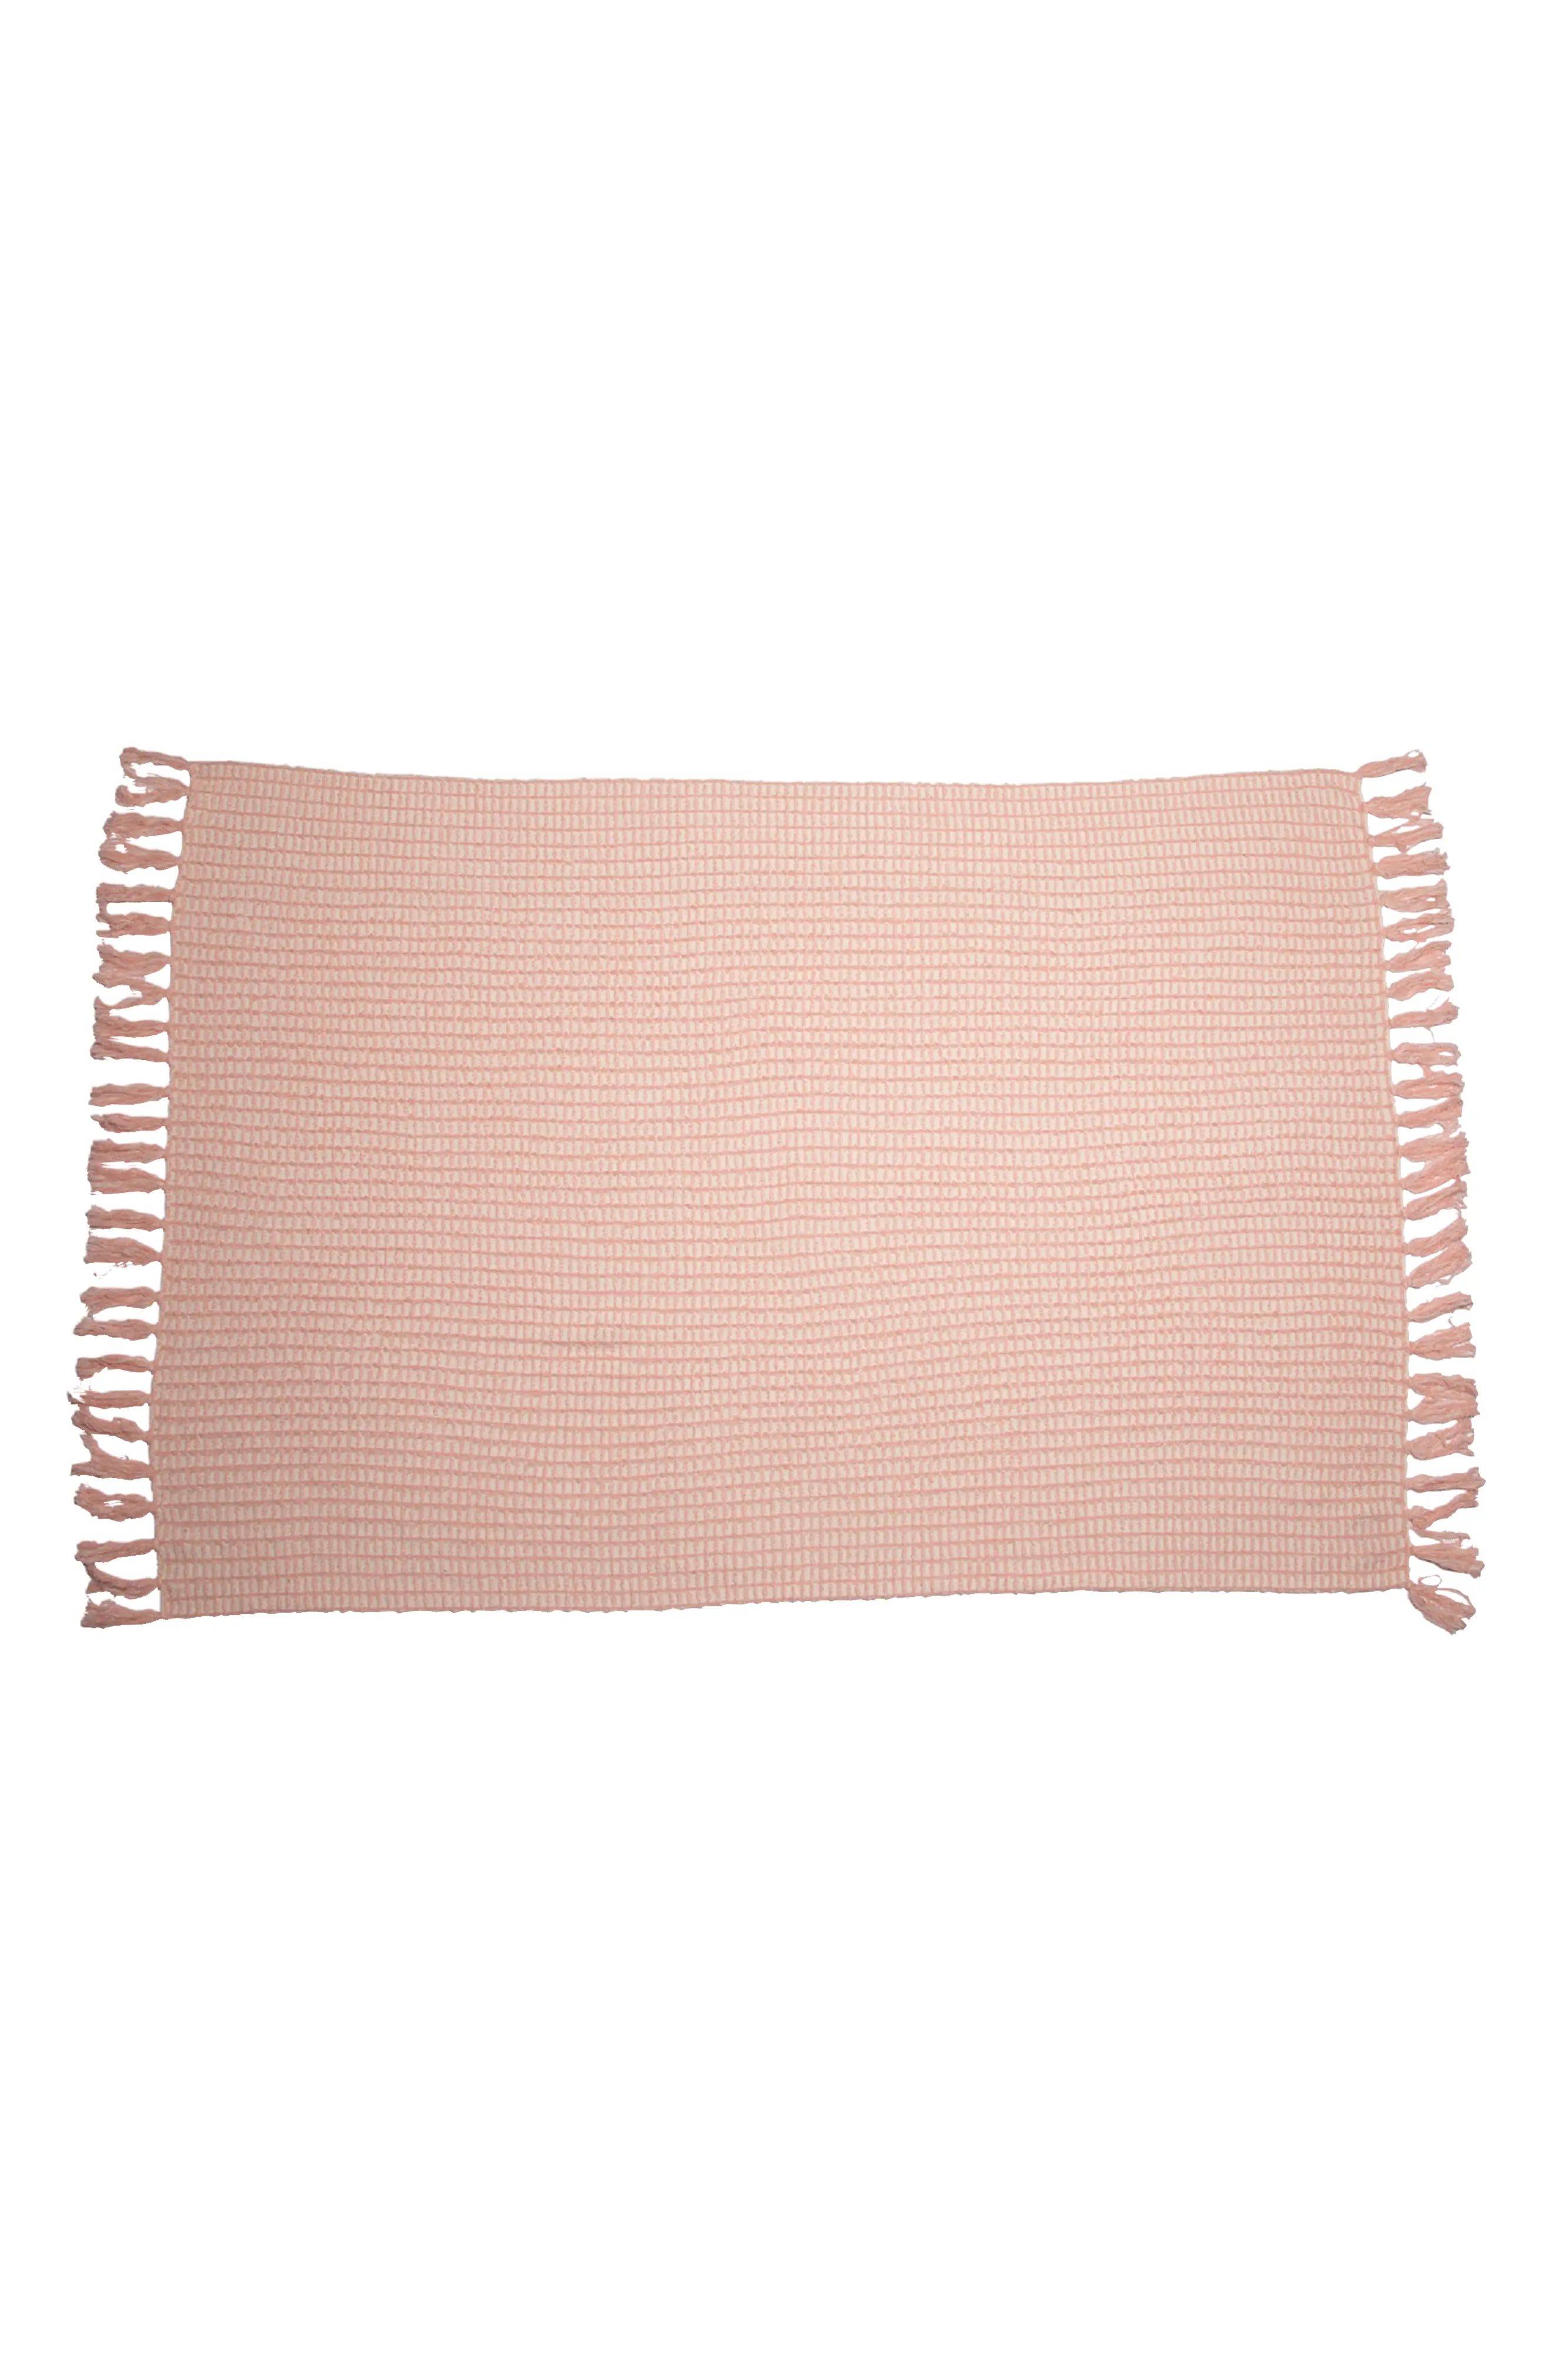 Barefoot Dreams Cozychic(TM) Beach House Throw Blanket, Size One Size - Pink | Nordstrom